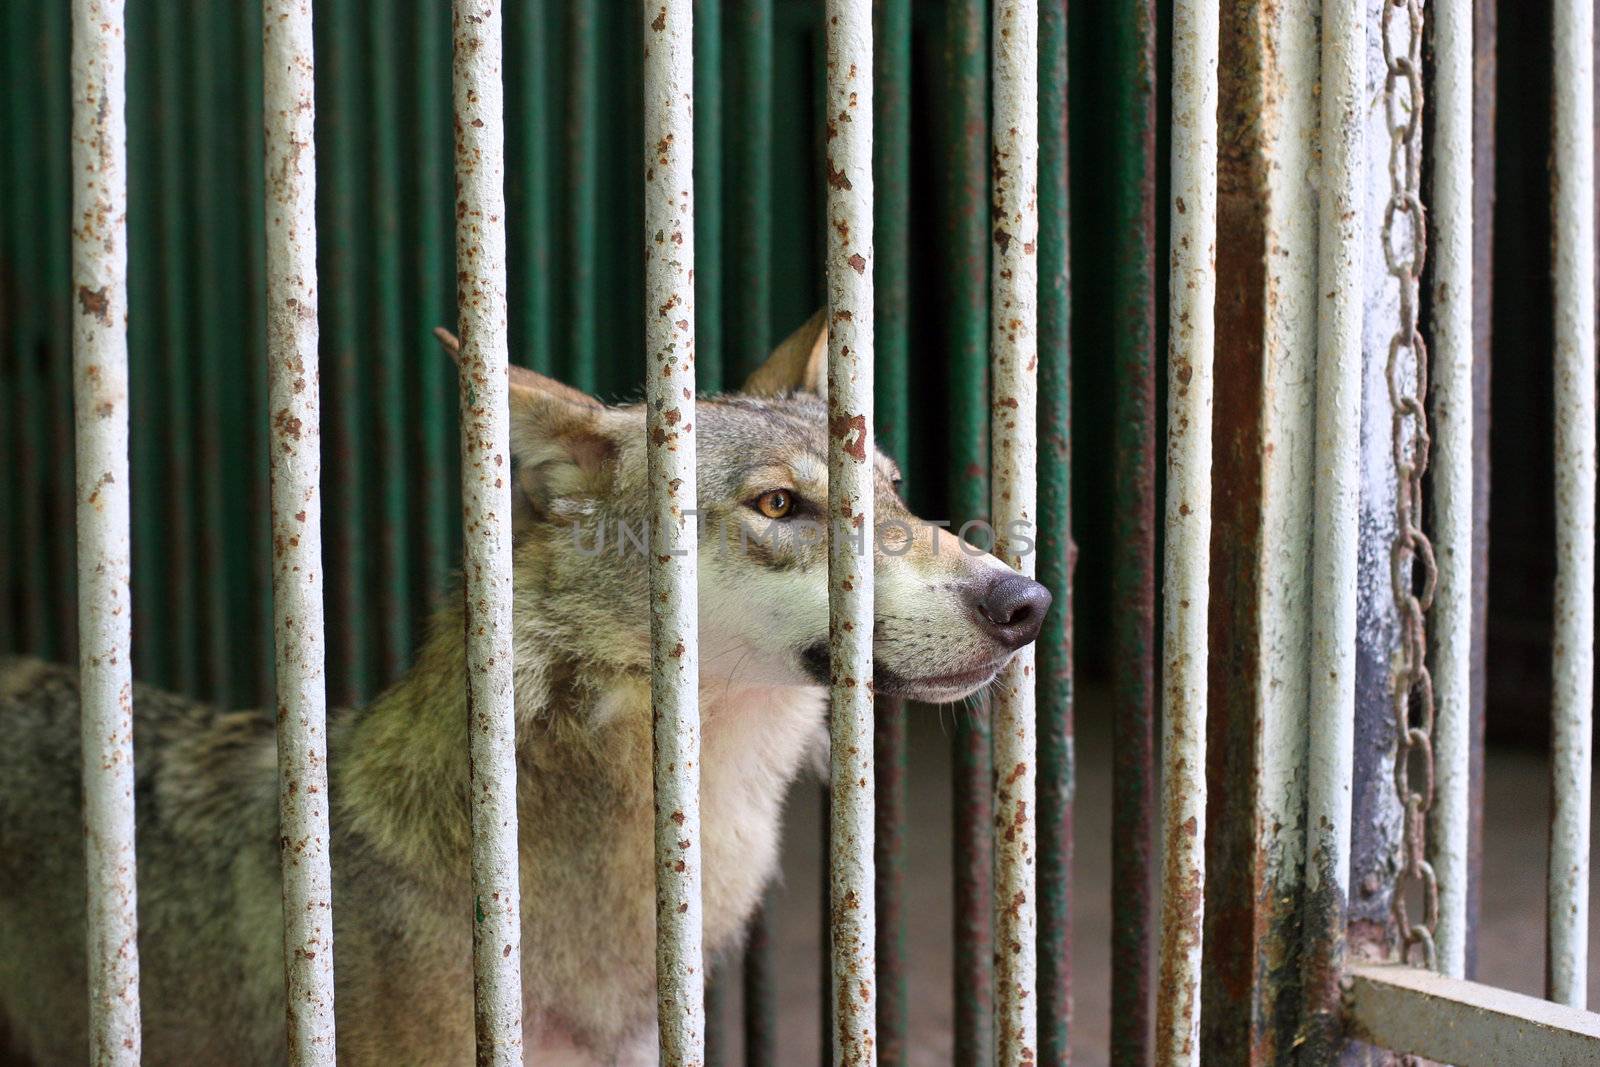 Wolf in the cage at the zoo